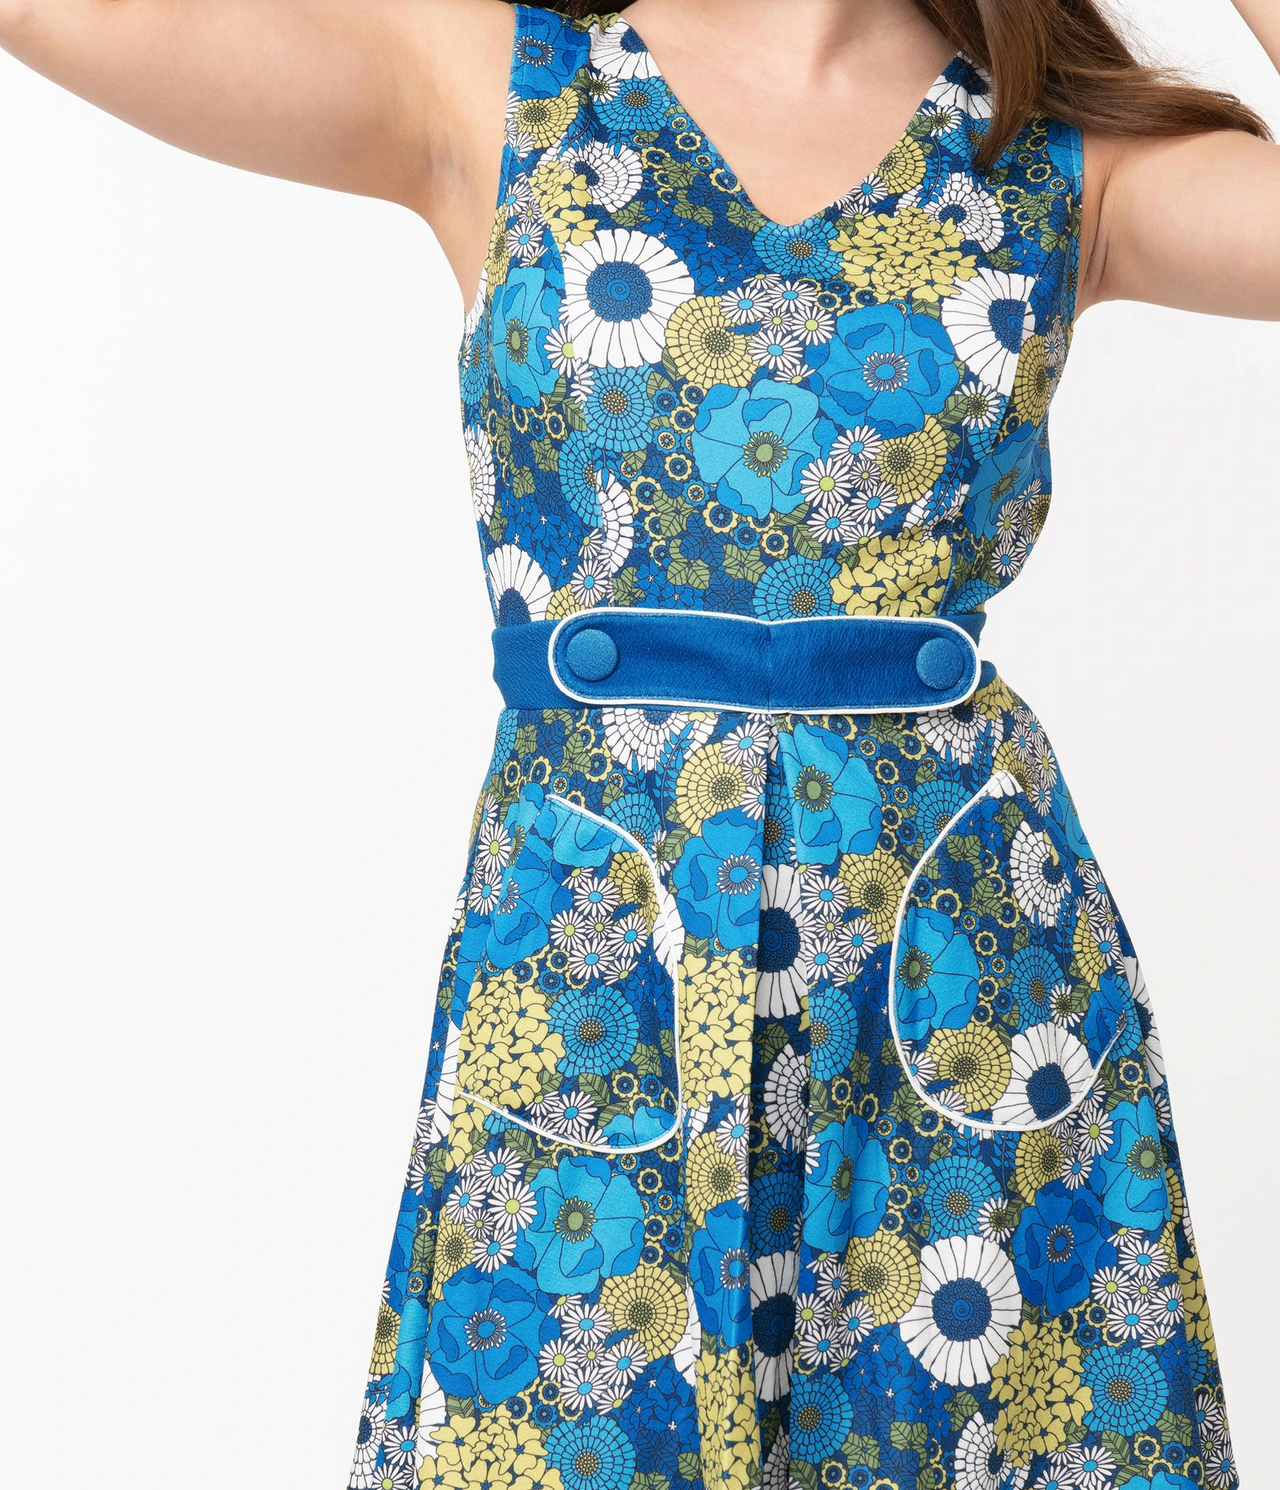 SMAK PARLOUR MOD FLORAL TOTALLY RADICAL FIT & FLARE DRESS